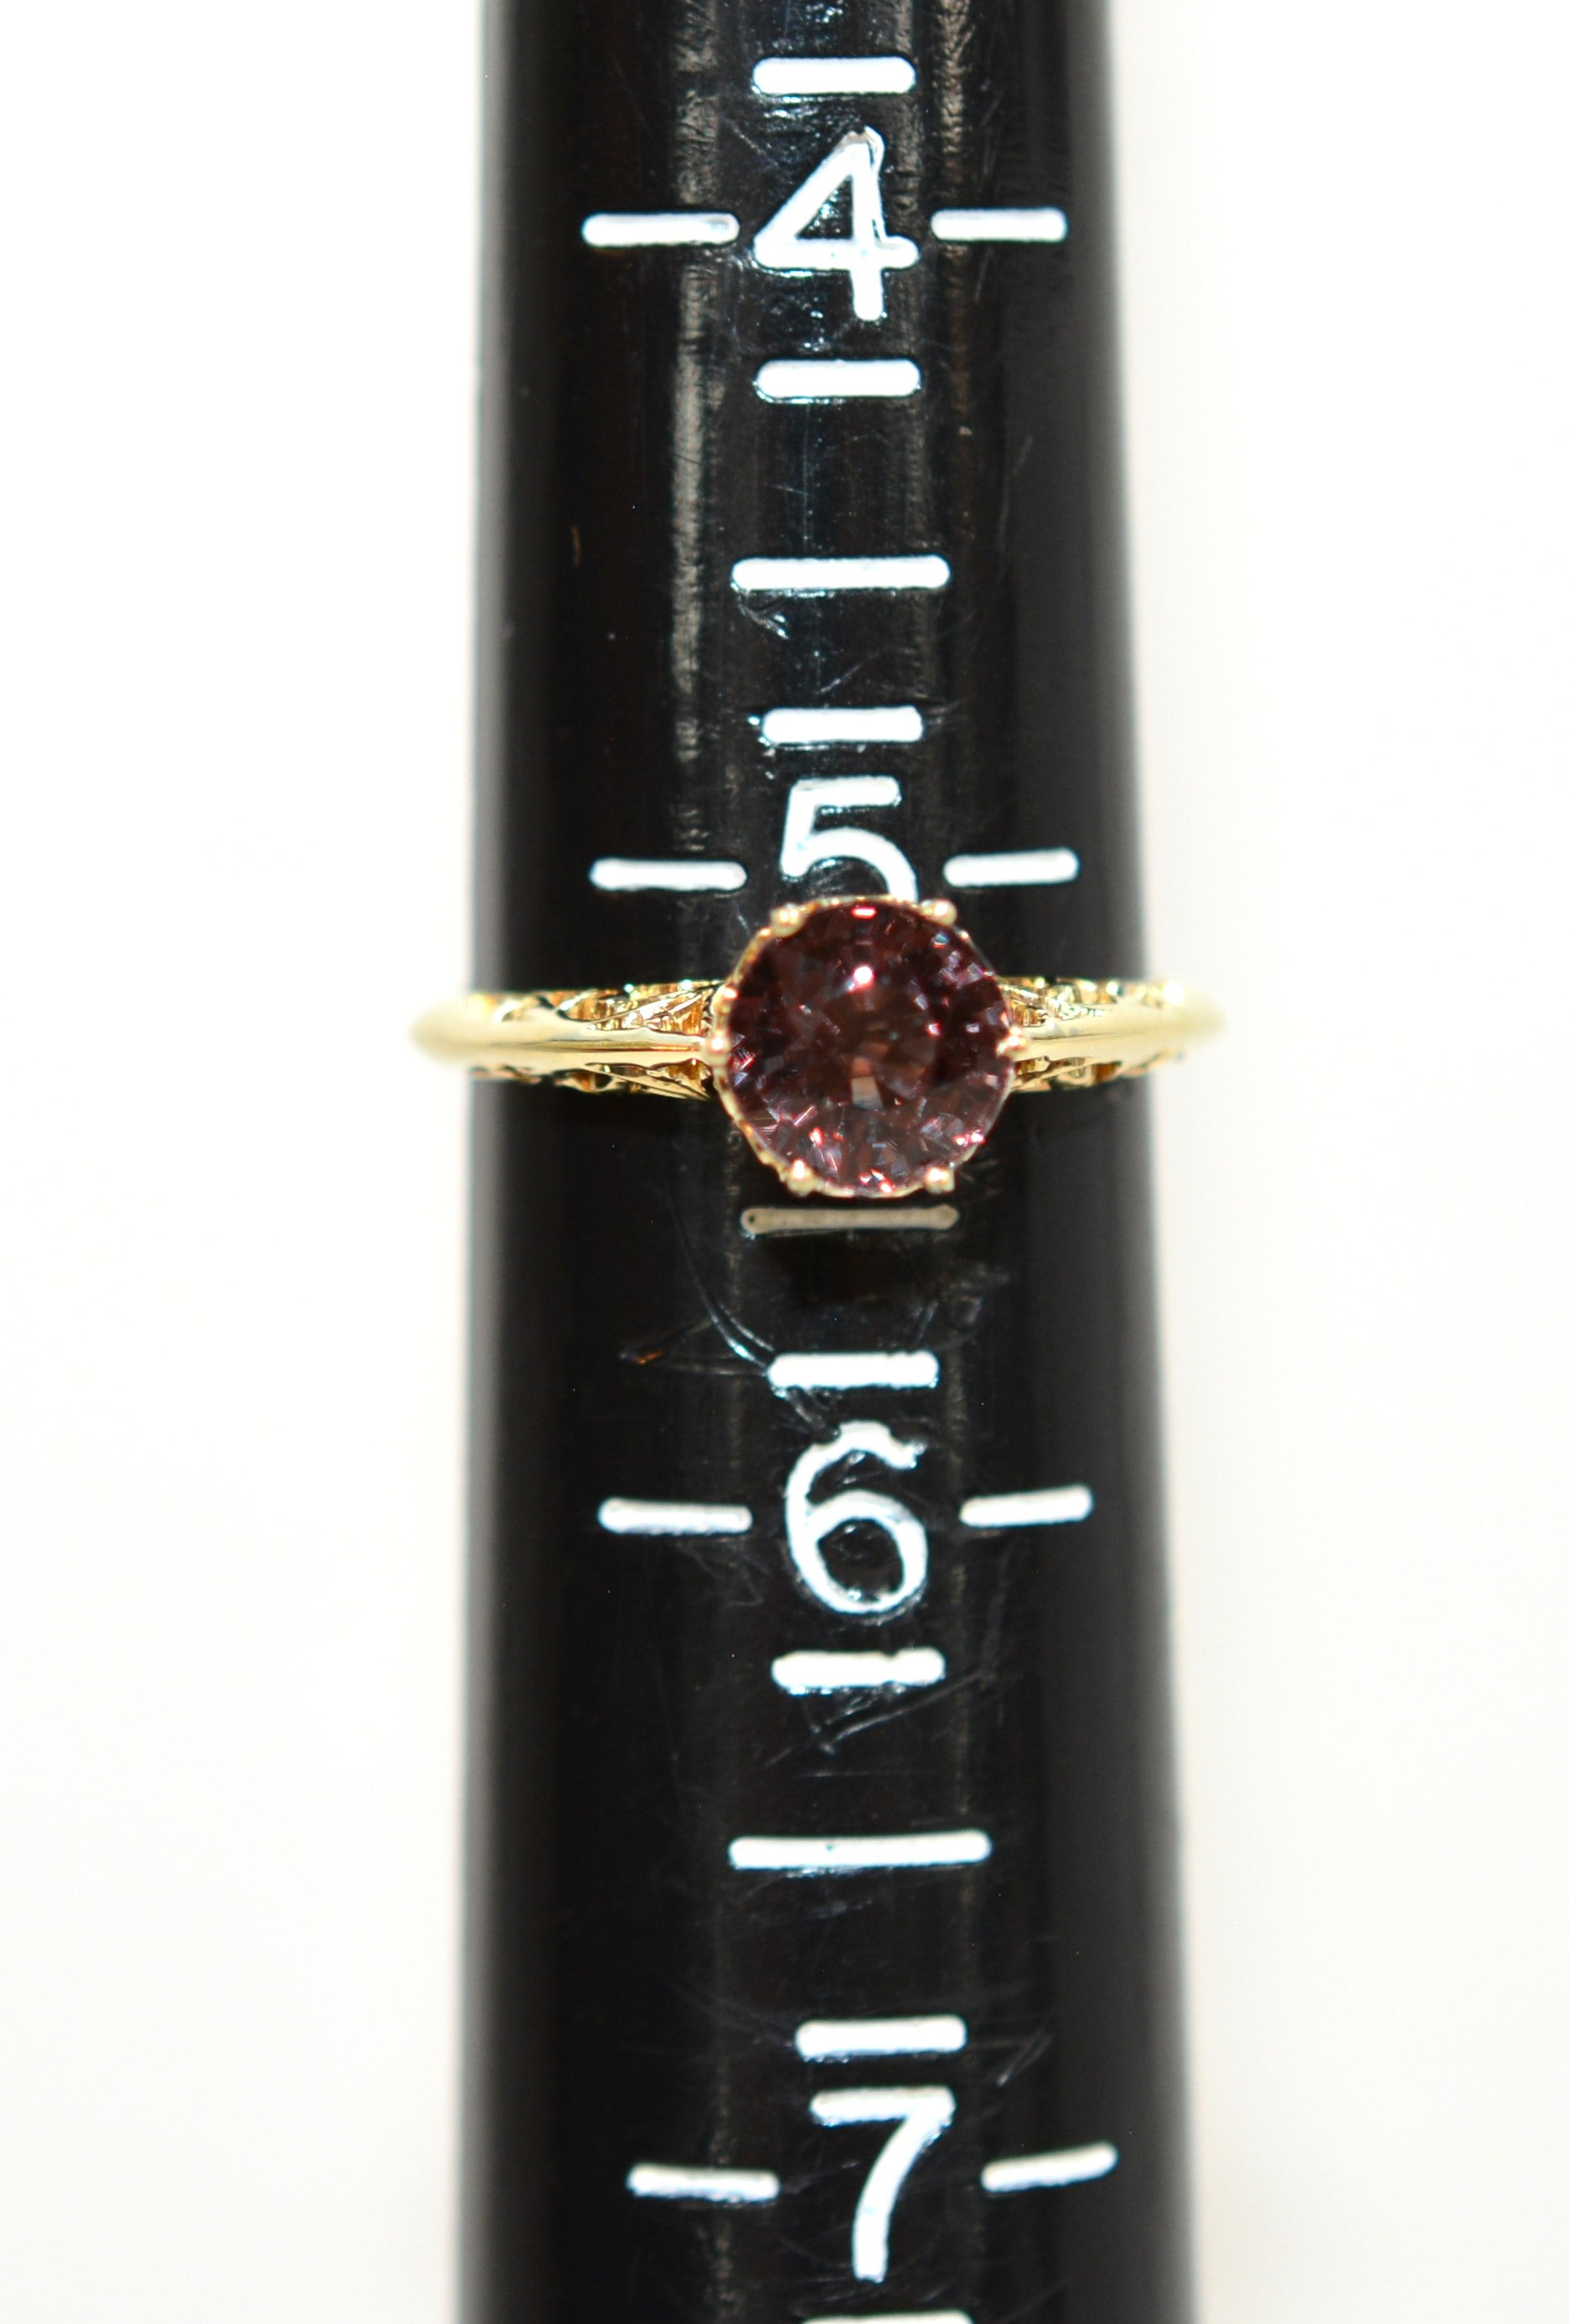 Natural Malaia Malaya Garnet Ring 14K Solid Gold 1.19ct Solitaire Ring Engagement Ring Gemstone Ring Womens Ring Estate Jewelry Vintage Fine